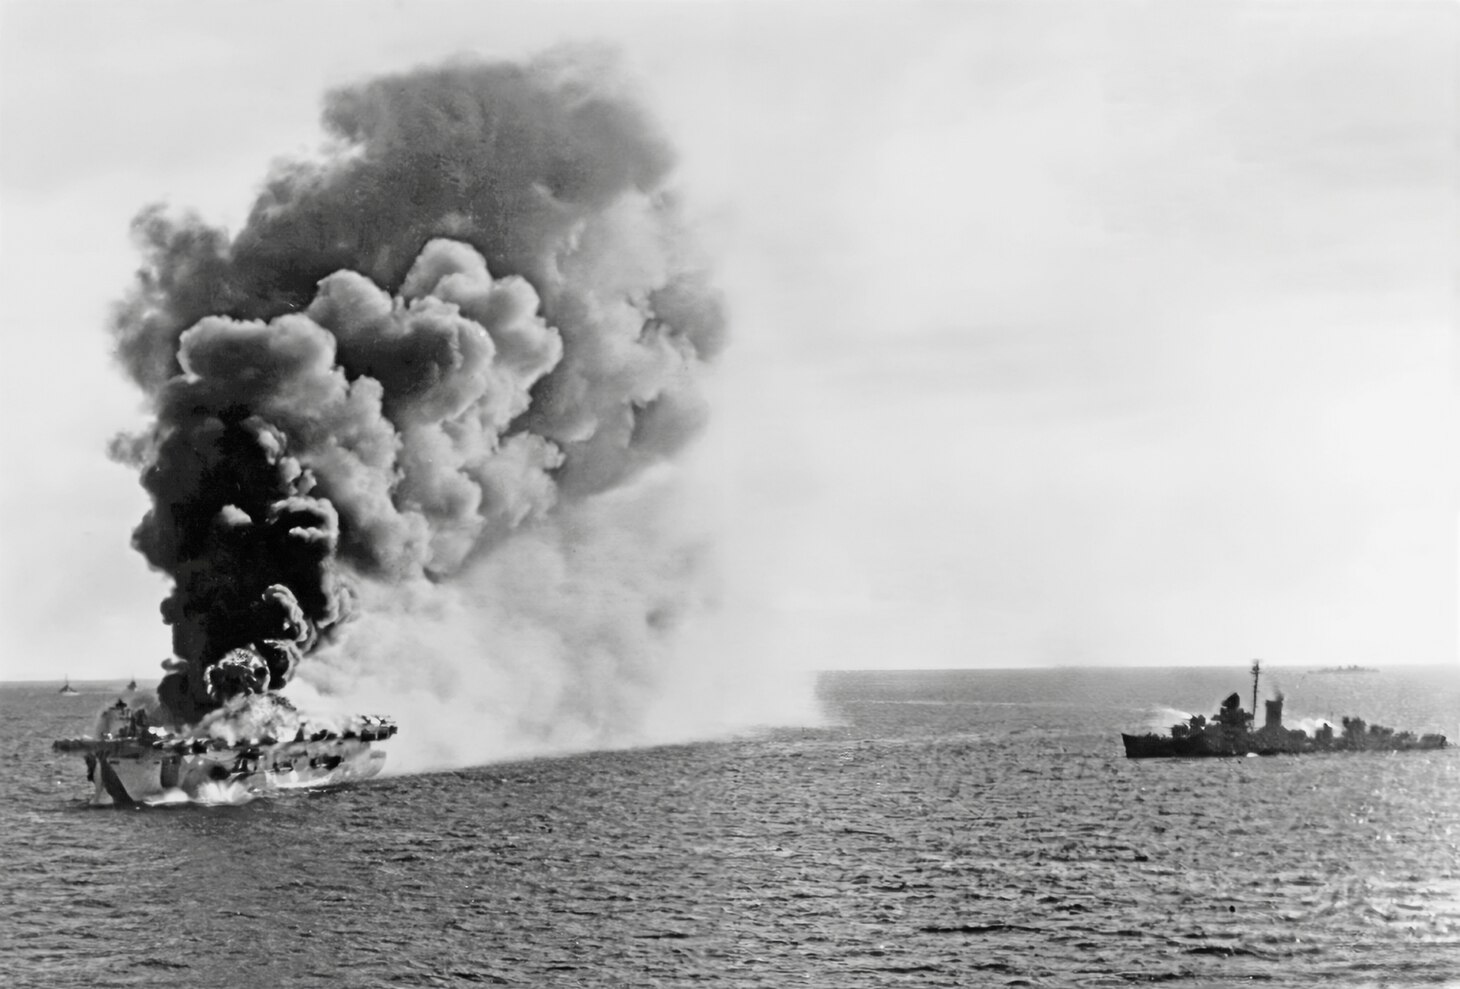 Burning in the Sulu Sea, off Luzon, on Jan. 4, 1945, during the Lingayen Operation. She had been hit by a Kamikaze. A destroyer is standing by with fire hoses ready.